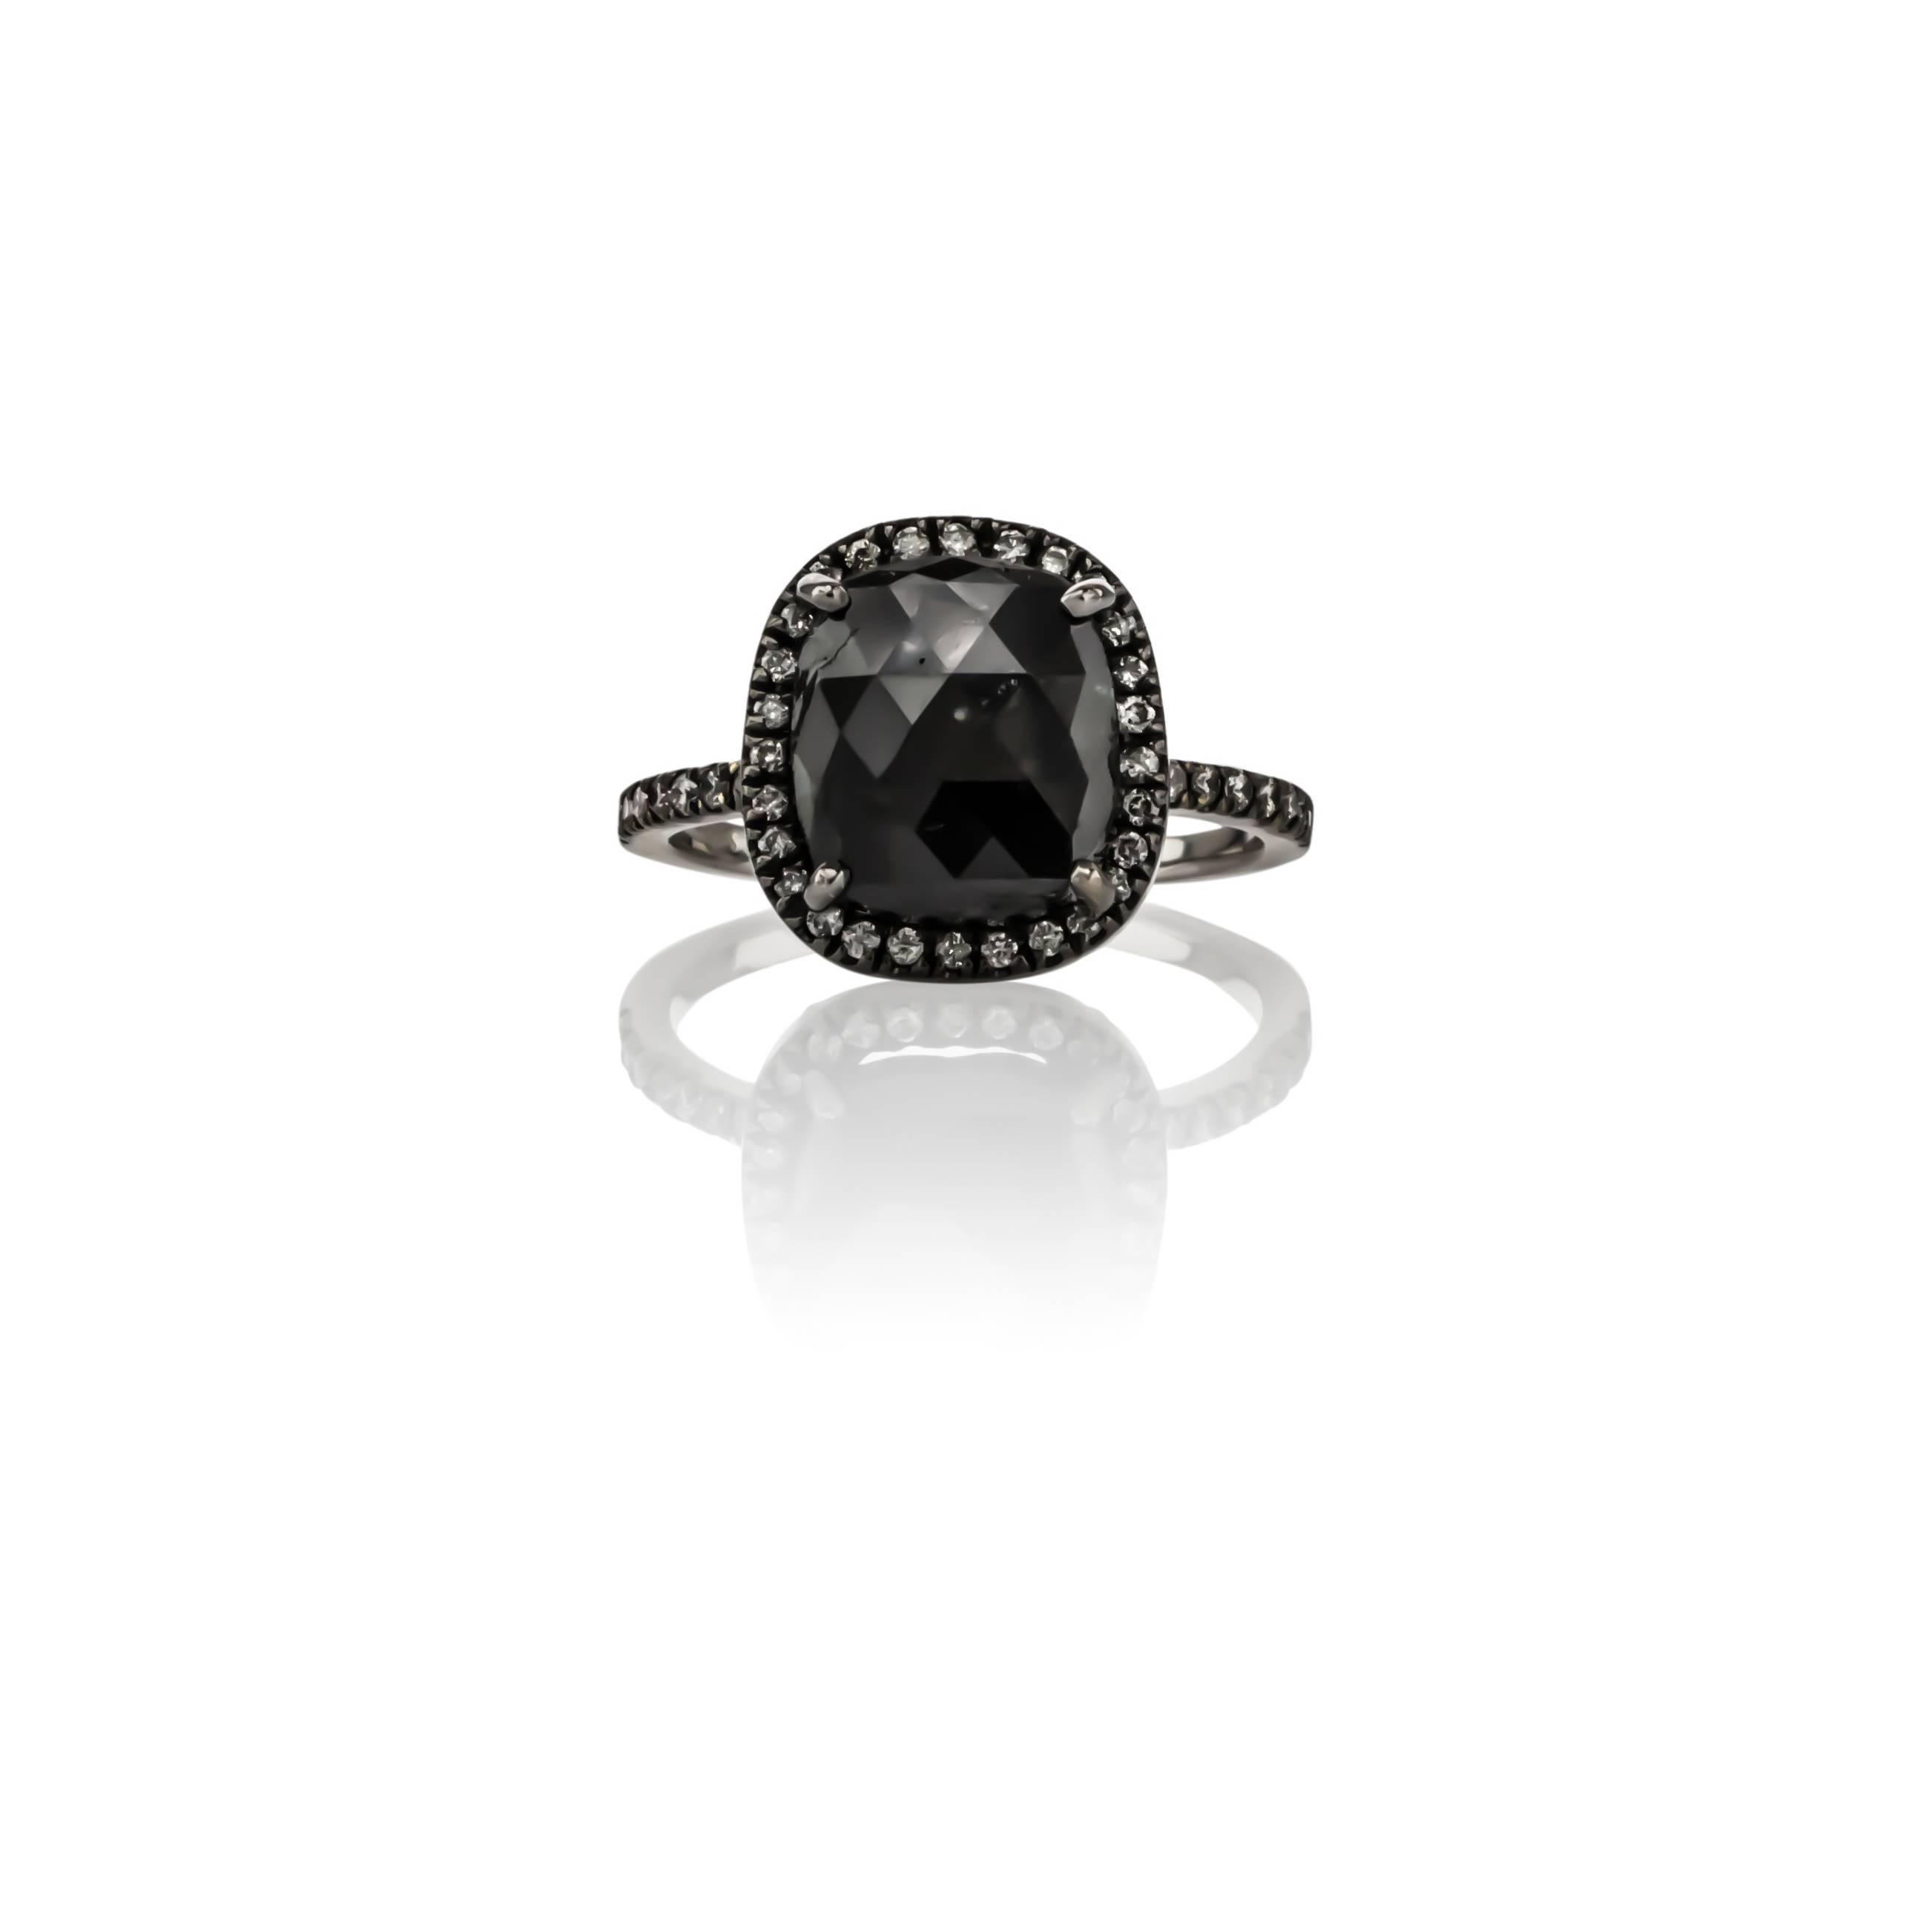 18K white gold black diamond halo ring, by Sethi Couture. Set with one cushion cut black diamond weighing 4.46 carats, surrounded by round diamonds weighing .35 carats total weight.

Finger size 6.50, can be re-sized.